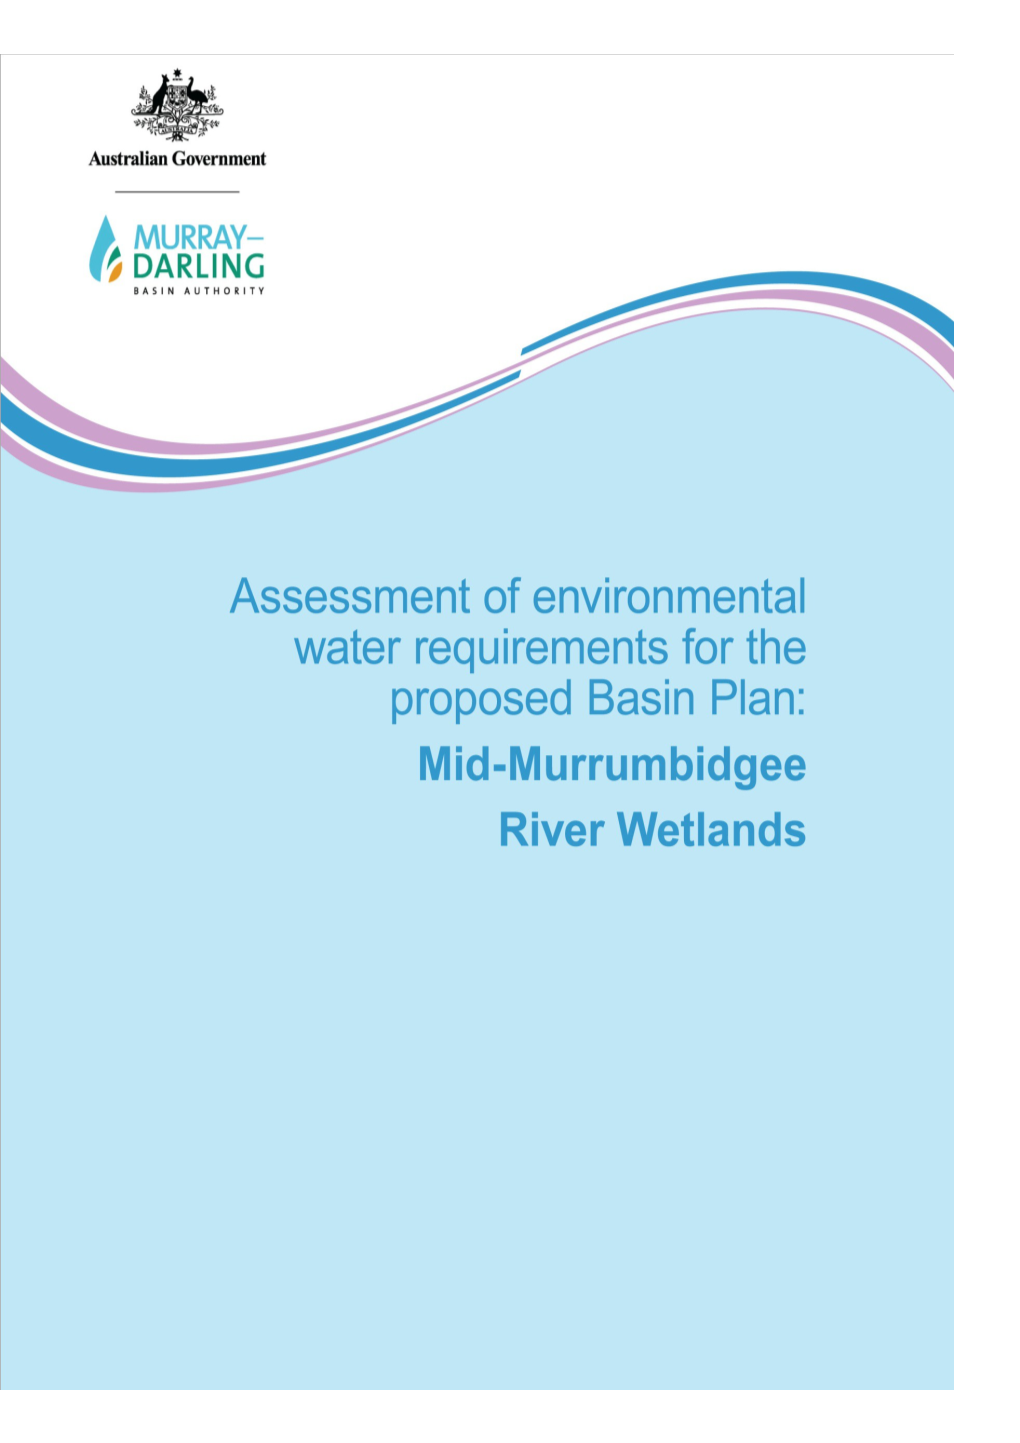 Assessment of Environmental Water Requirements for the Proposed Basin Plan:Mid-Murrumbidgee